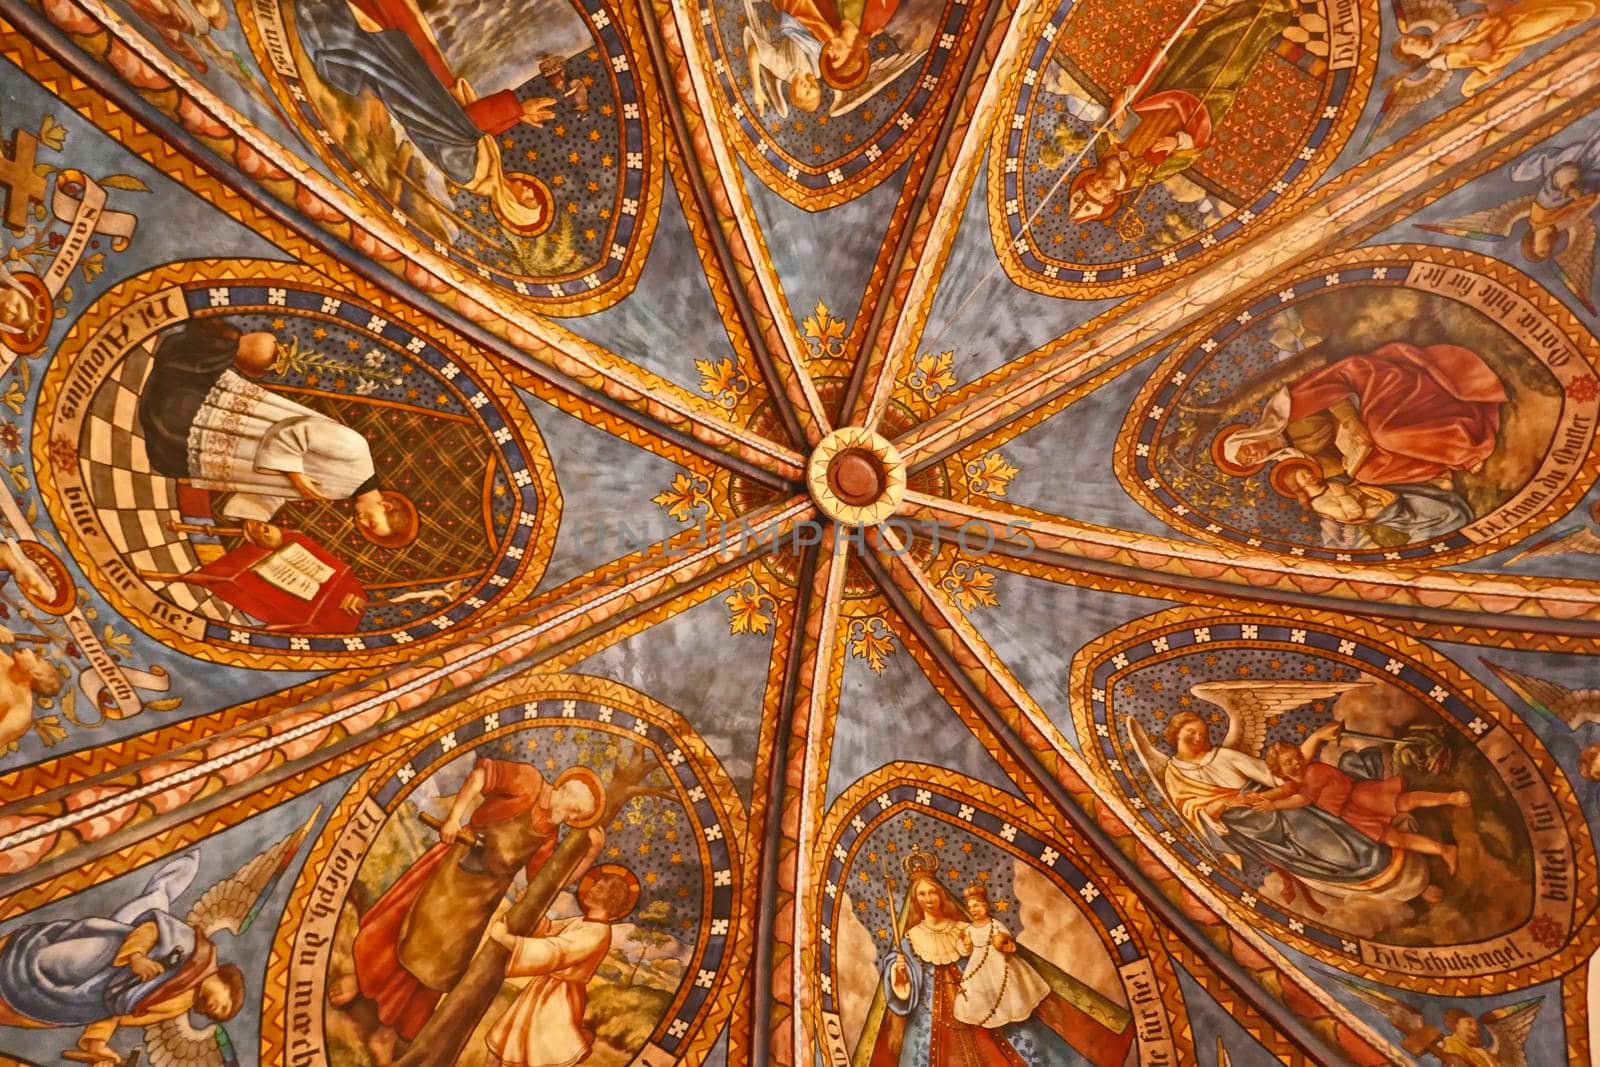 A remarkable ceiling in an old church by WielandTeixeira